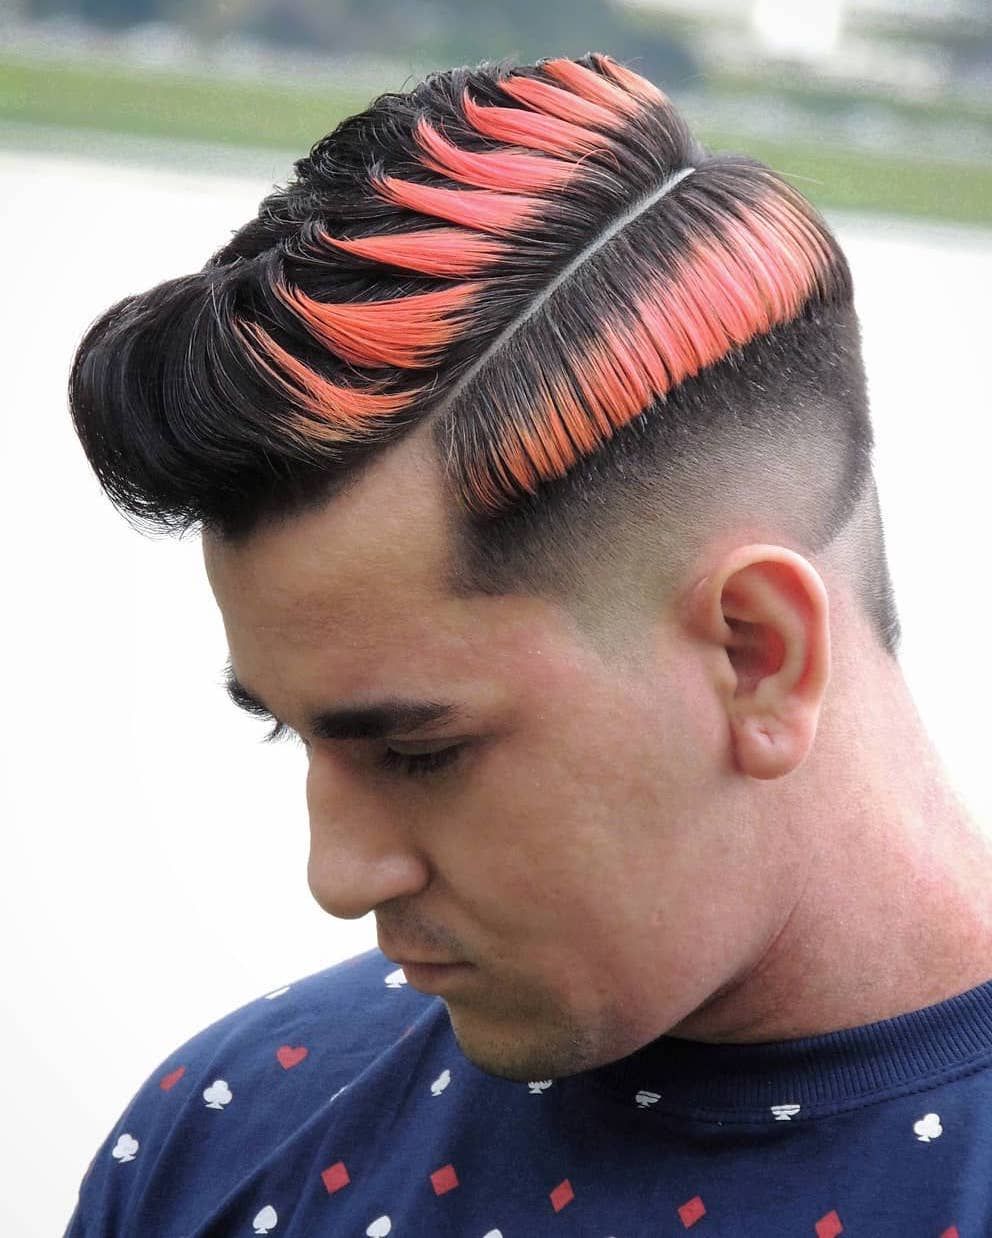 Show Off Your Dyed Hair: 10 Colorful Men's Hairstyles Intended For Trendy Turquoise Side Parted Mohawk Hairstyles (View 20 of 20)